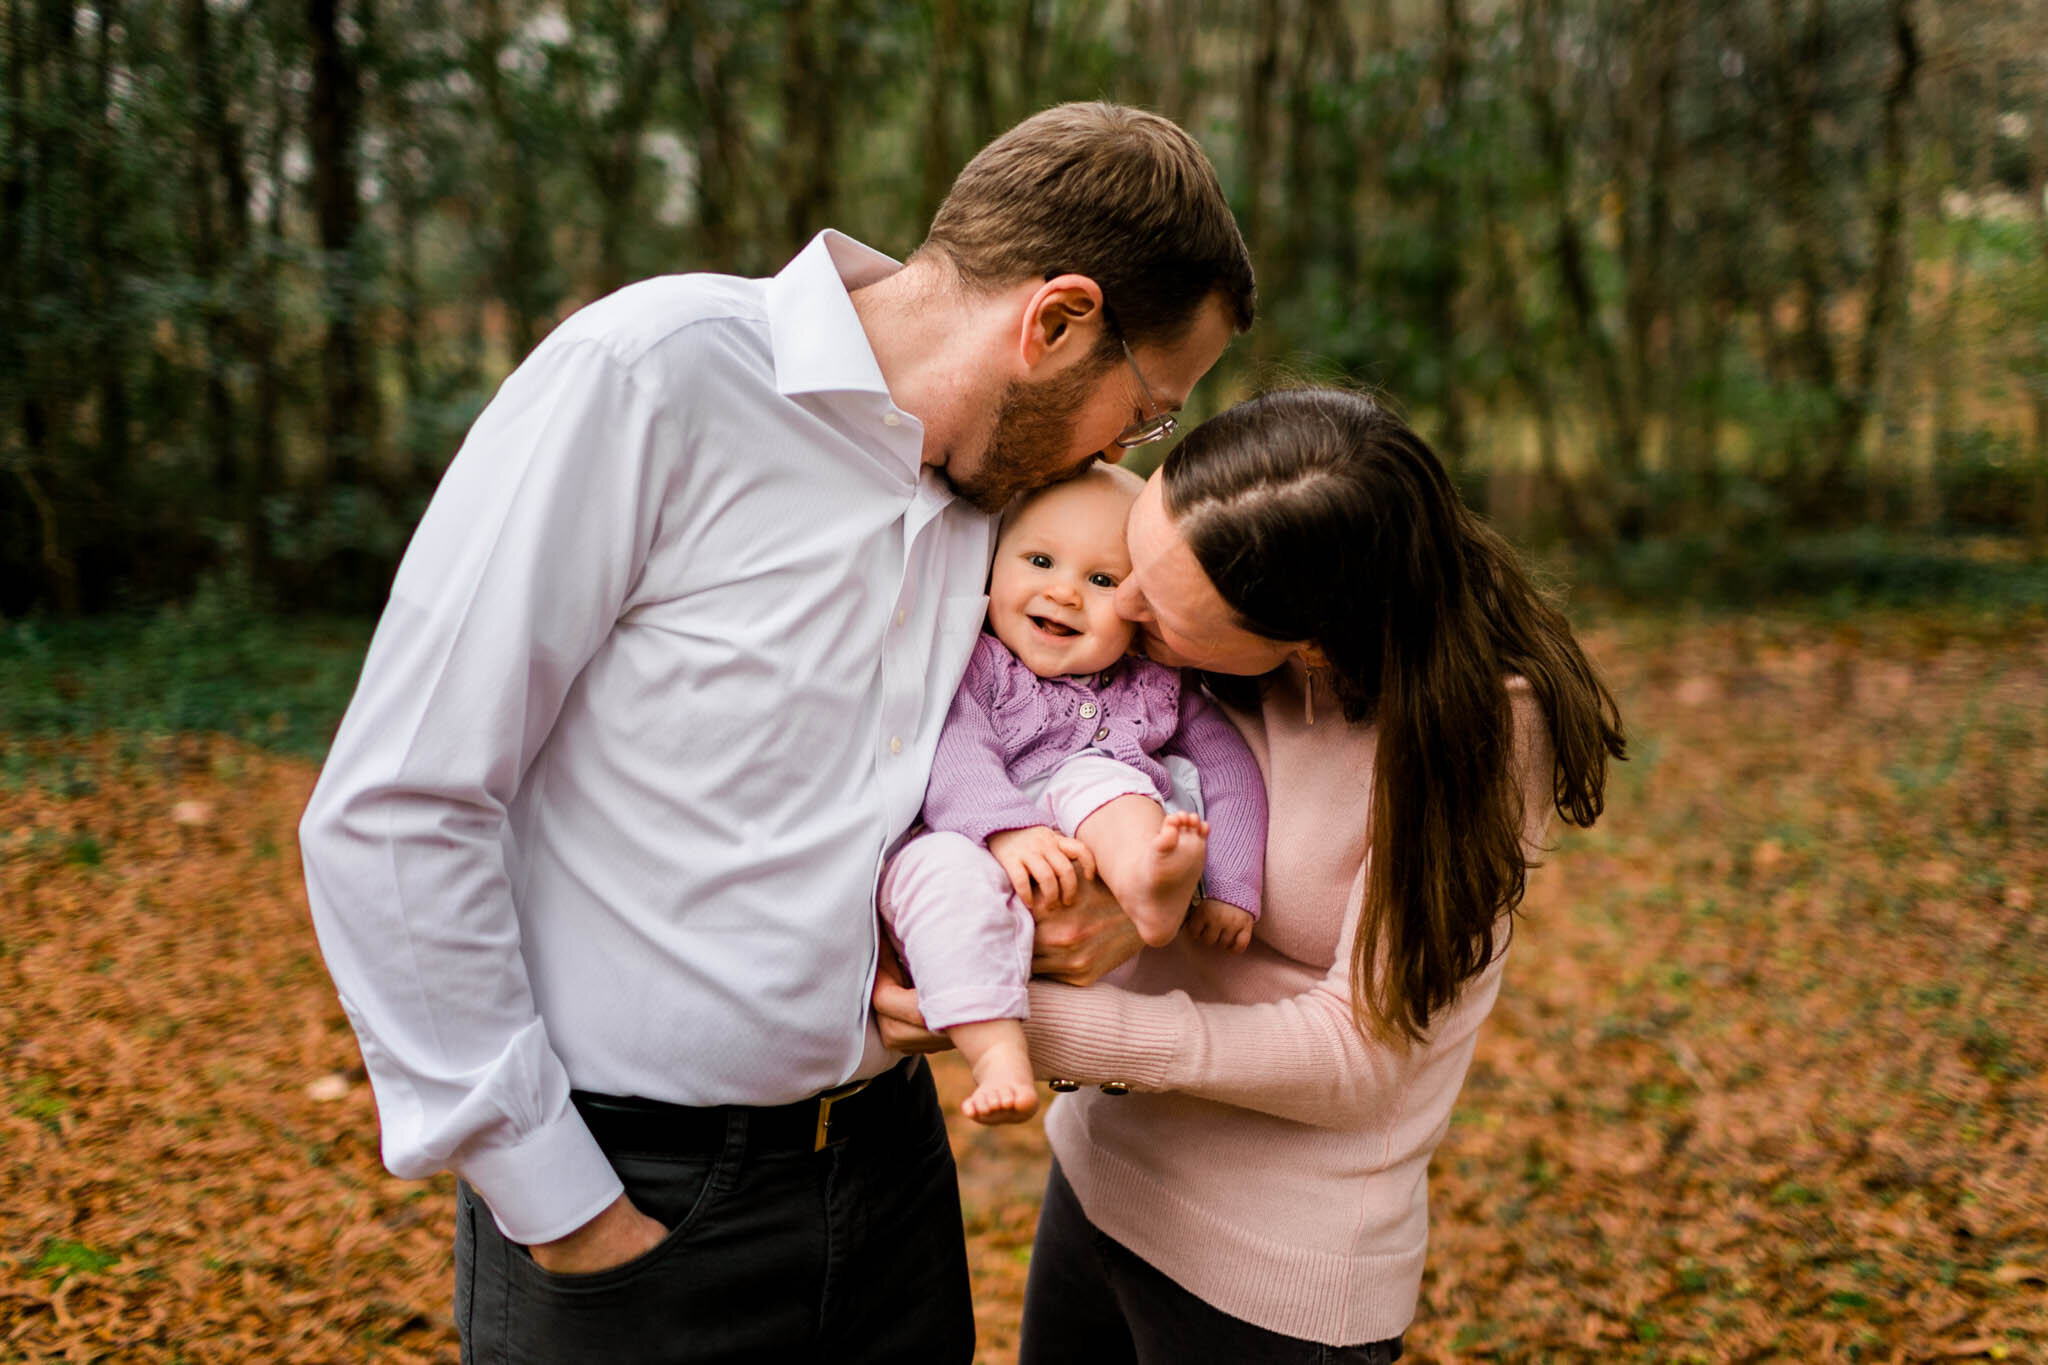 Durham Family Photographer | By G. Lin Photography | Parents holding baby and kissing her cheeks